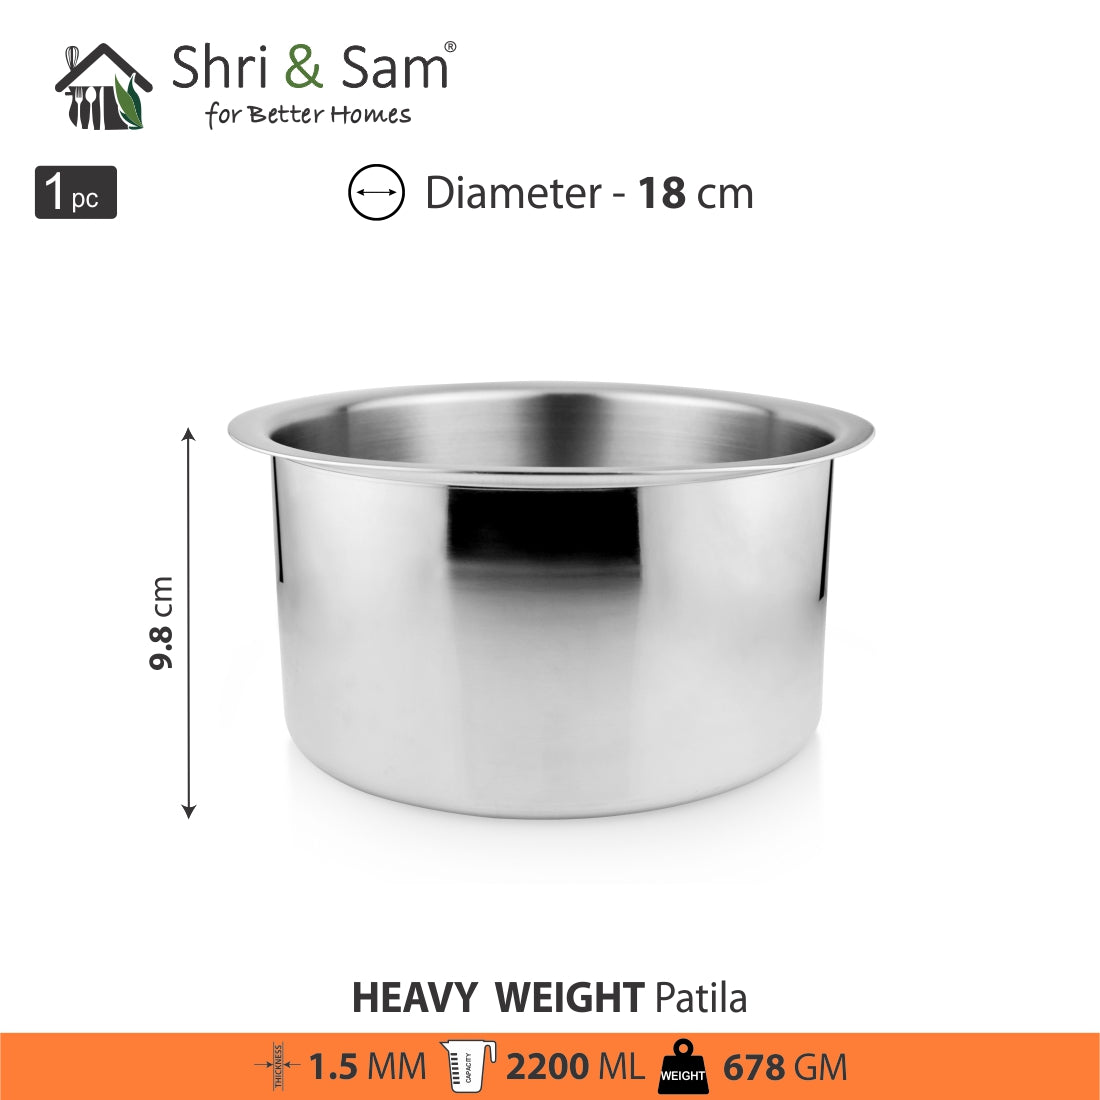 Stainless Steel Heavy Weight Patila